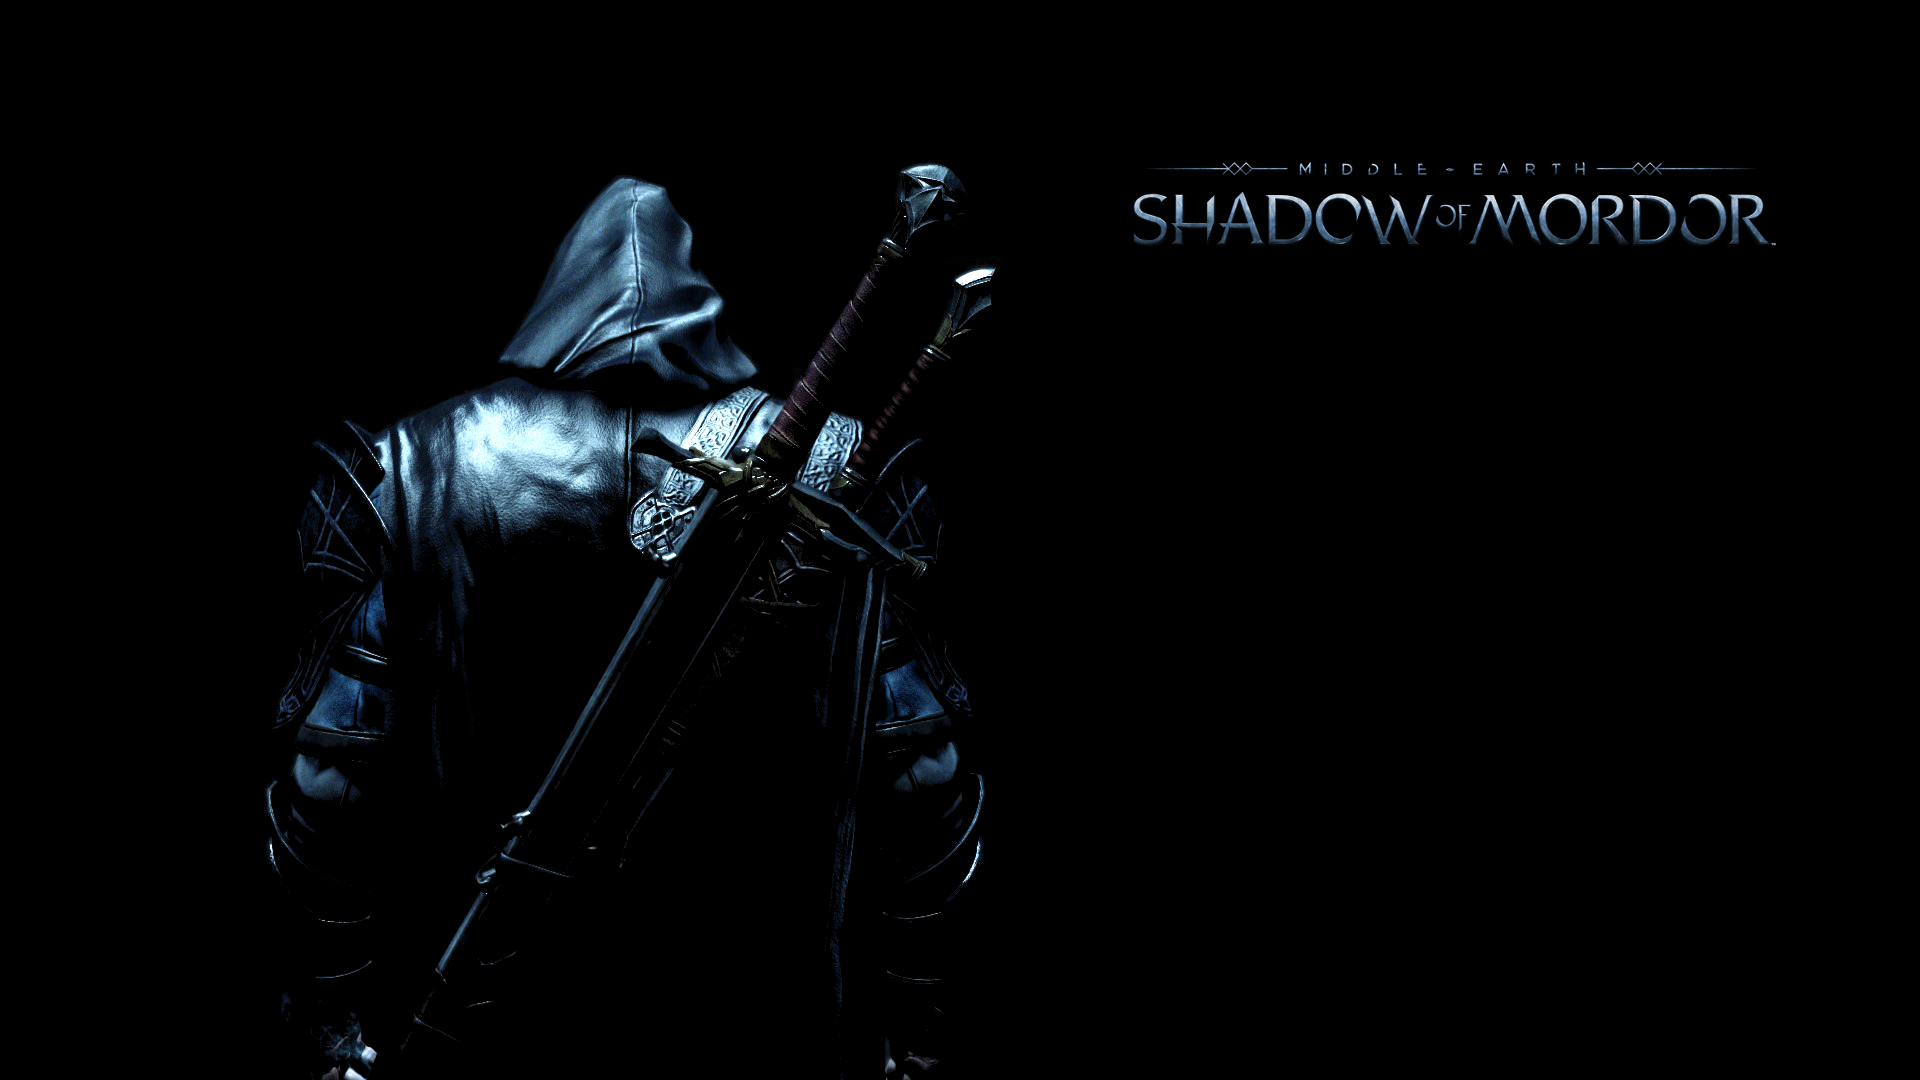 General 1920x1080 video games Middle-earth: Shadow of Mordor video game art simple background black background